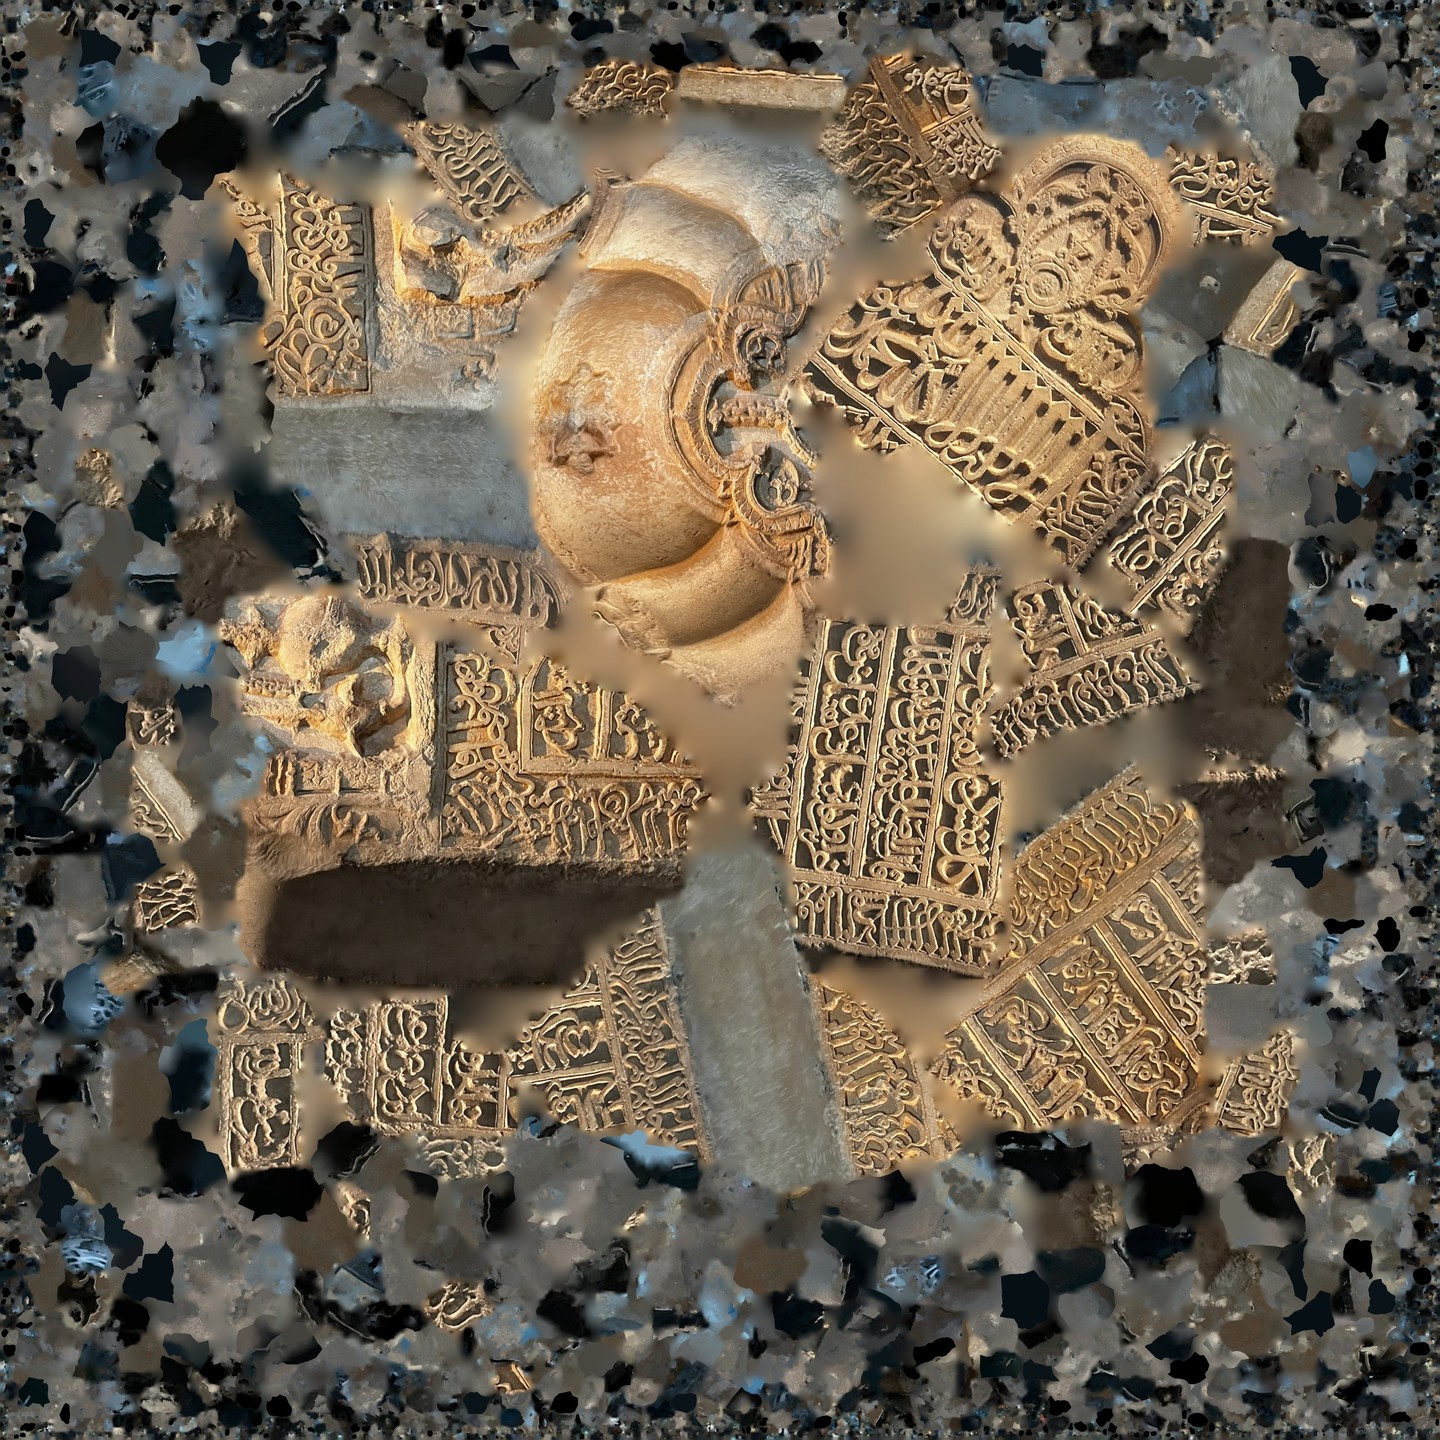 Texture of Islamic gravestone from BM
@Heritage-roots.com
@Photogrammetry